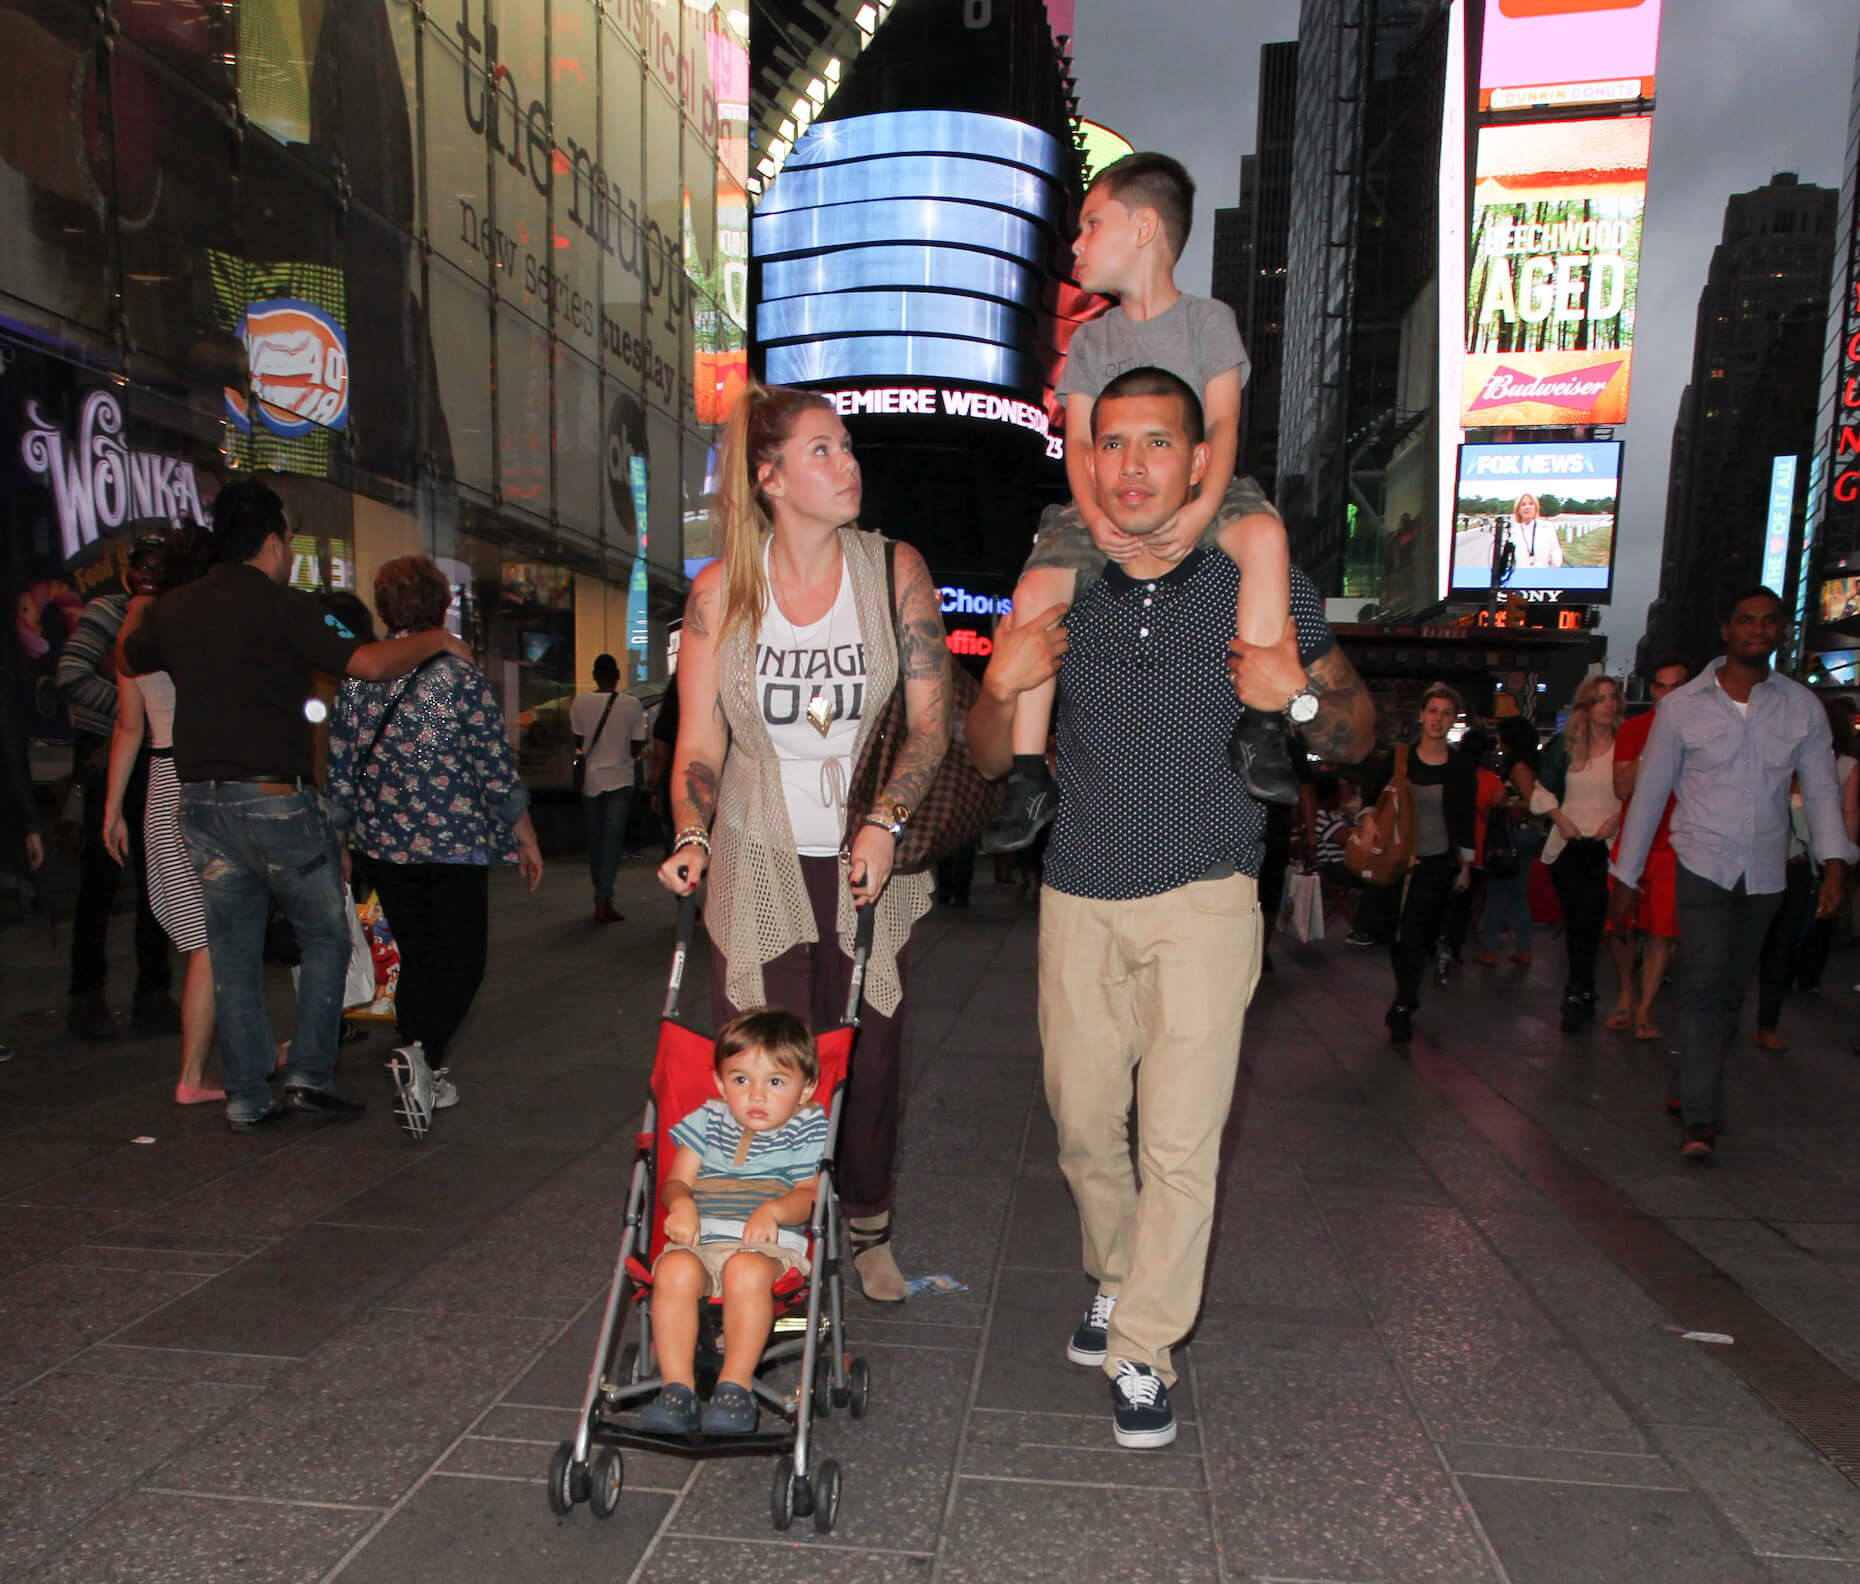 Teen Mom 2's Kailyn Lowry, Javi Marroquin, and sons Lincoln and Isaac Marroquin walking around New York City